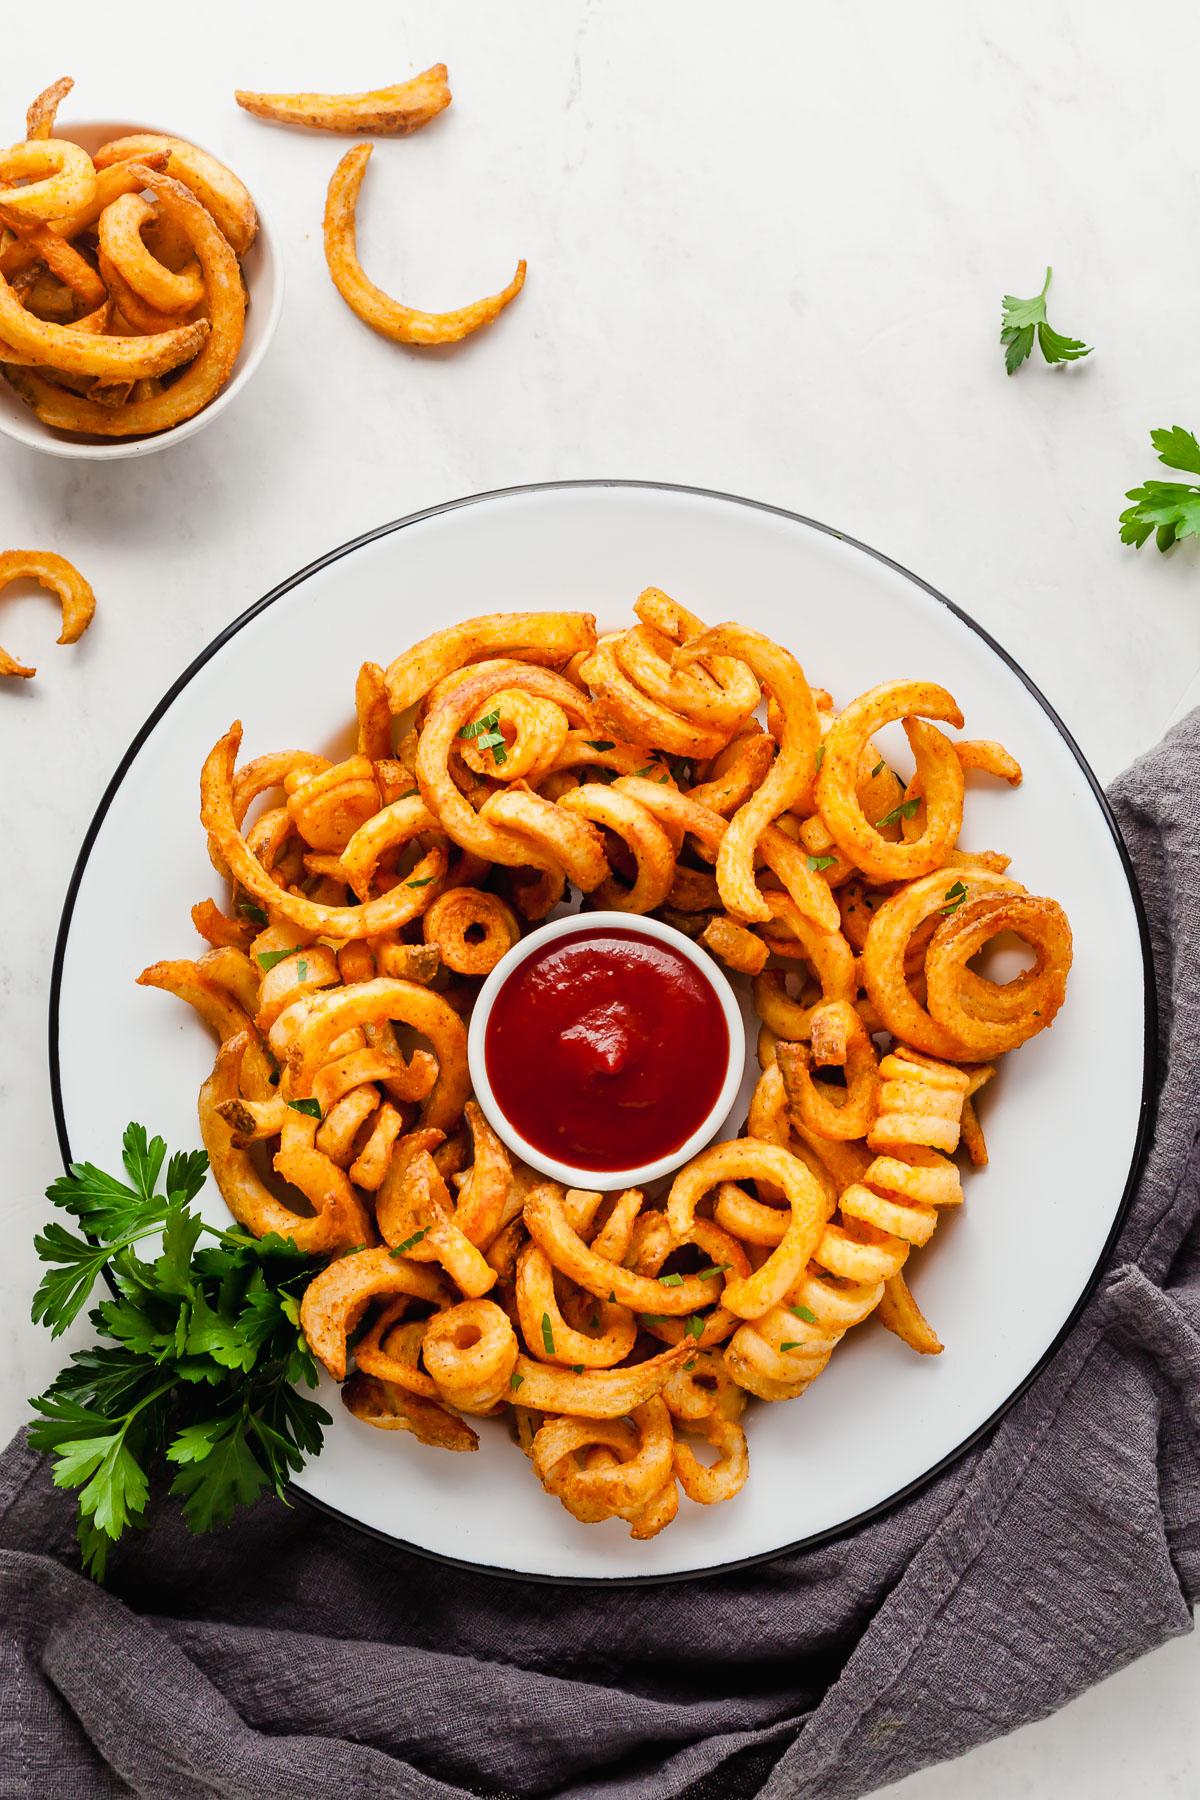 frozen curly fries made in the air fryer on a plate surrounding a bowl of ketchup